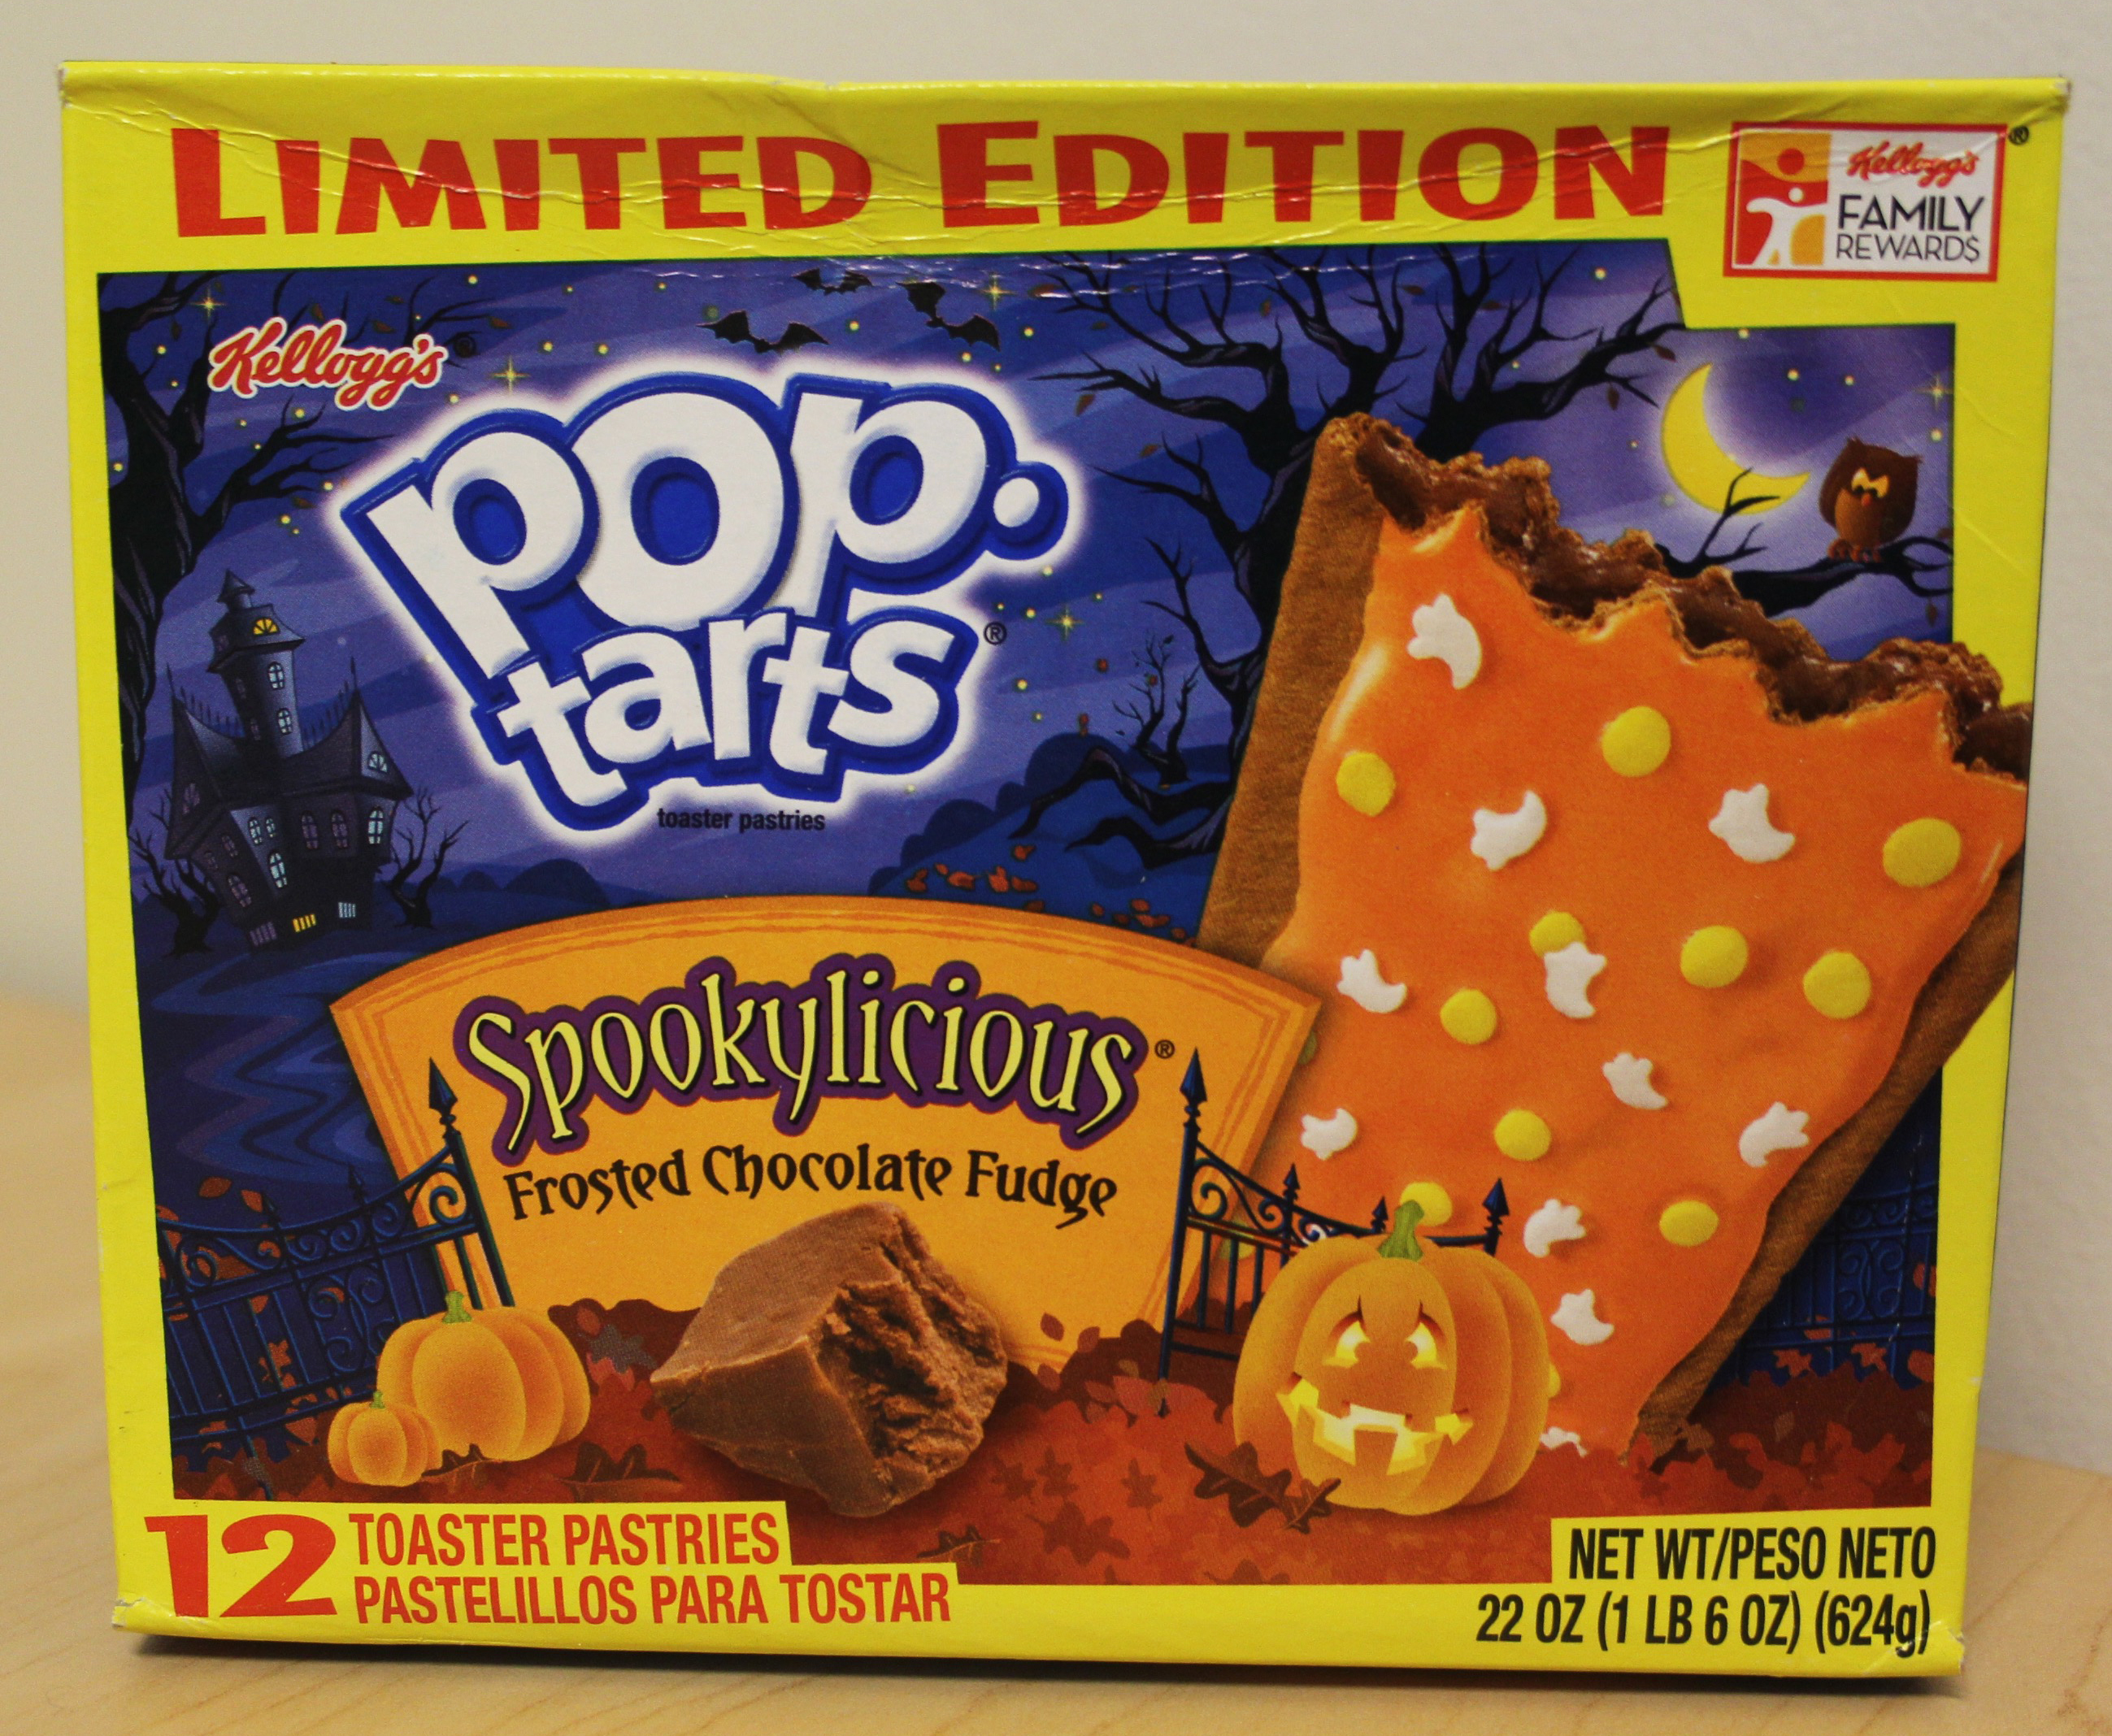 Review: Spookylicious Frosted Chocolate Fudge Pop-Tarts.